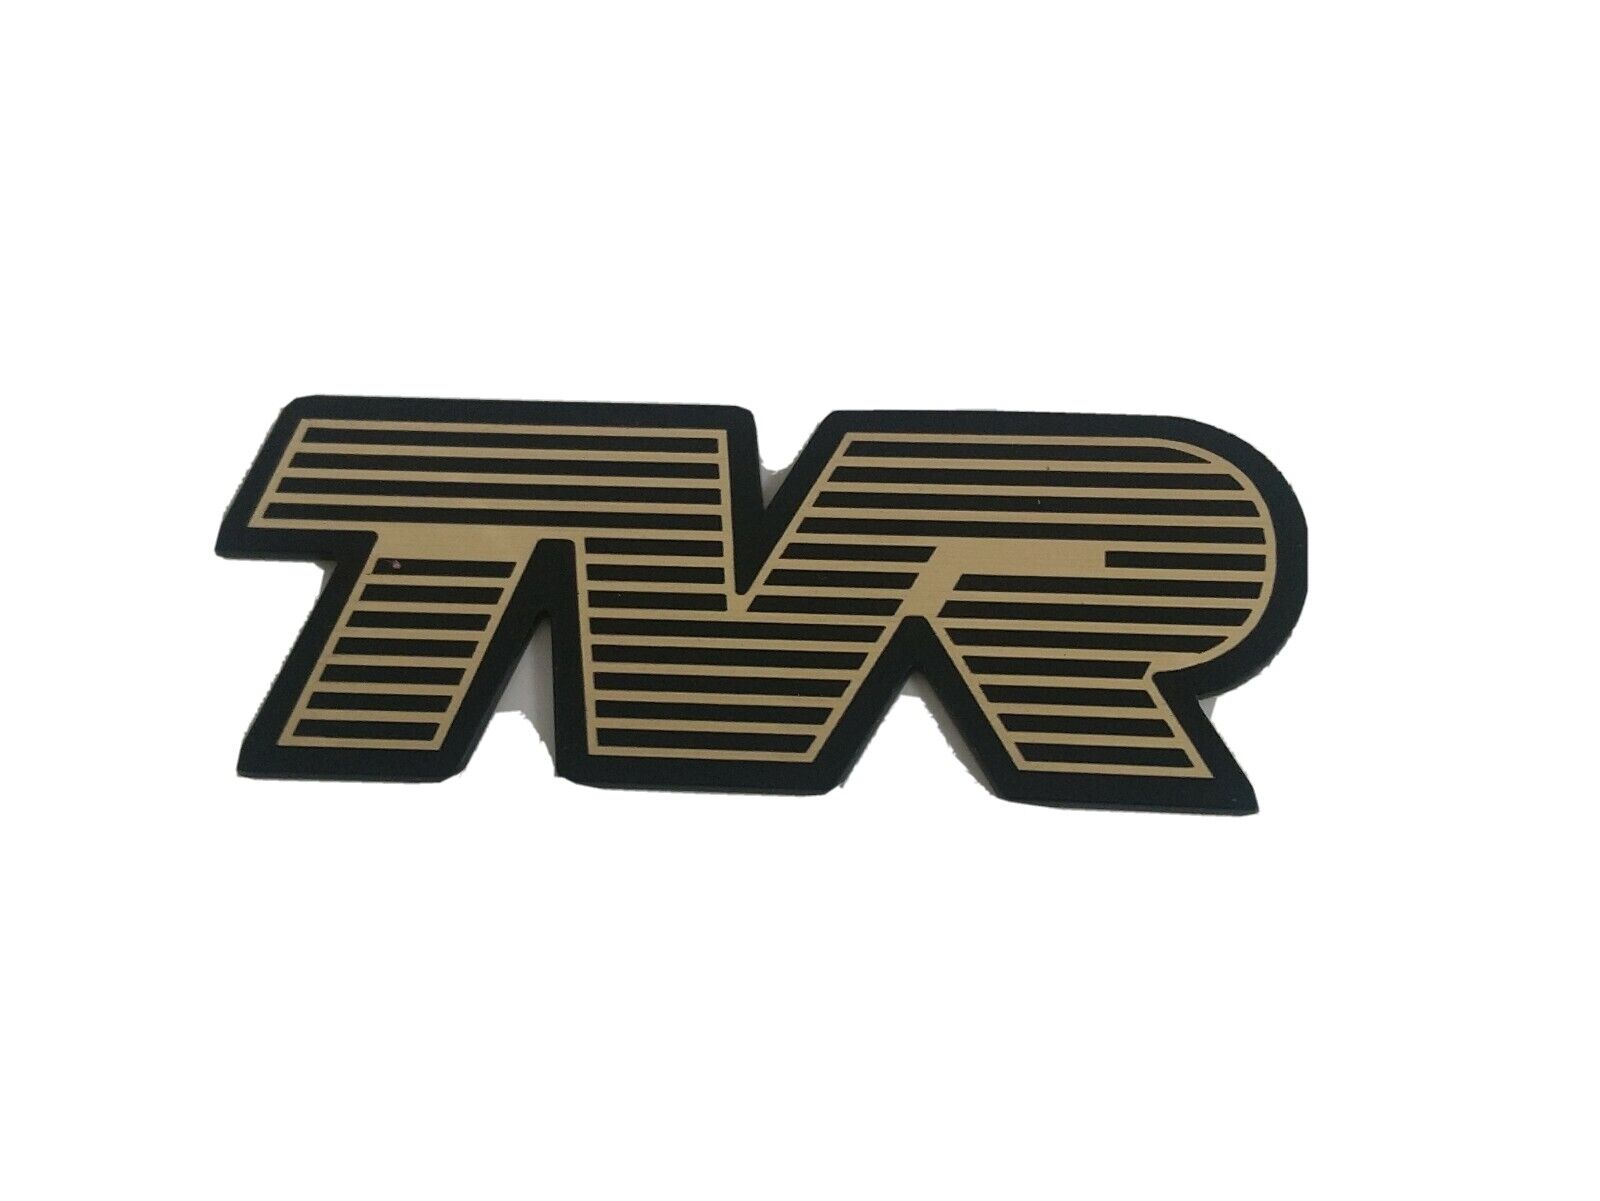 TVR Chimaera Replacement Bonnet Badge gold, toolbox garage or mancave gift